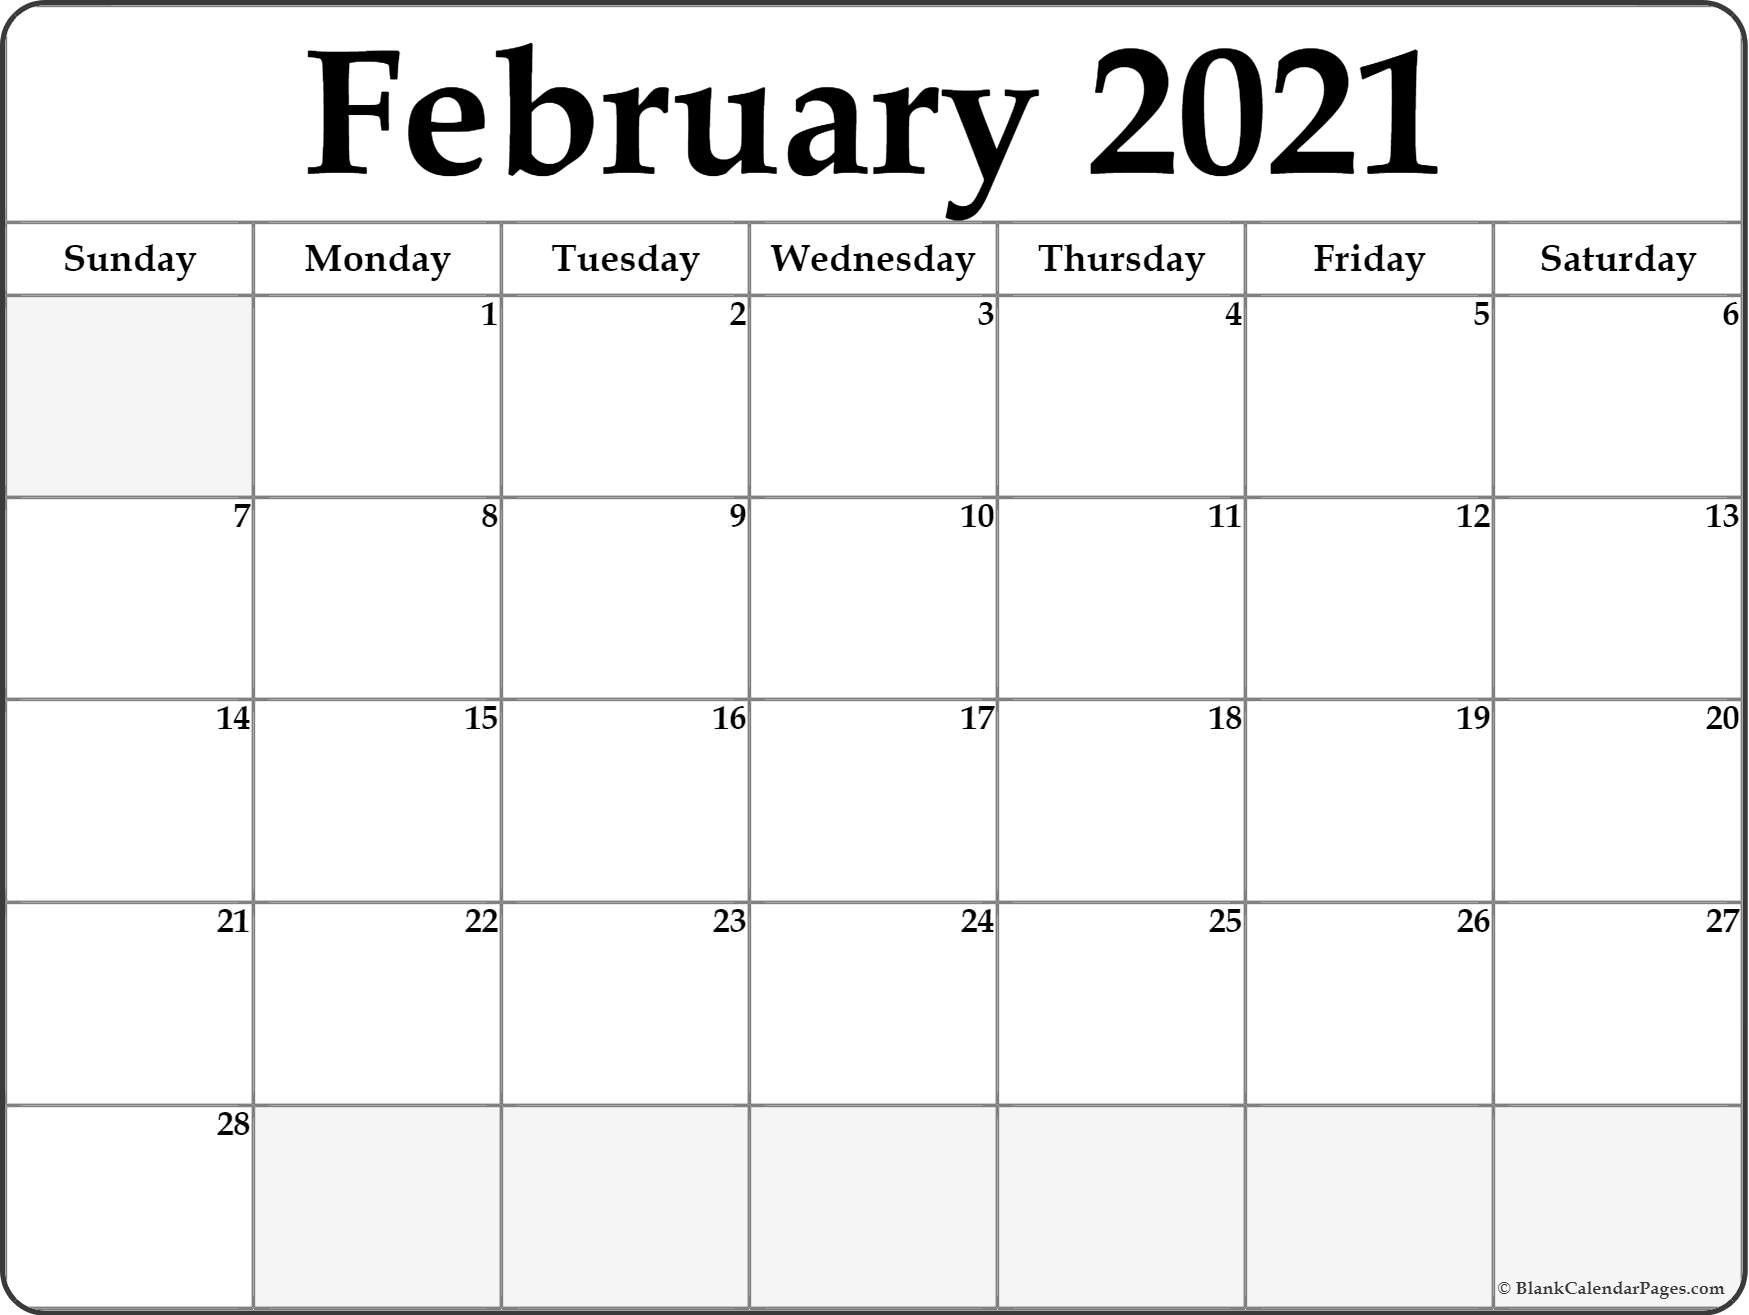 Calendar February 2021 Editable Planner In 2020 | February 2021 Printable Monthly Calendar With Lines